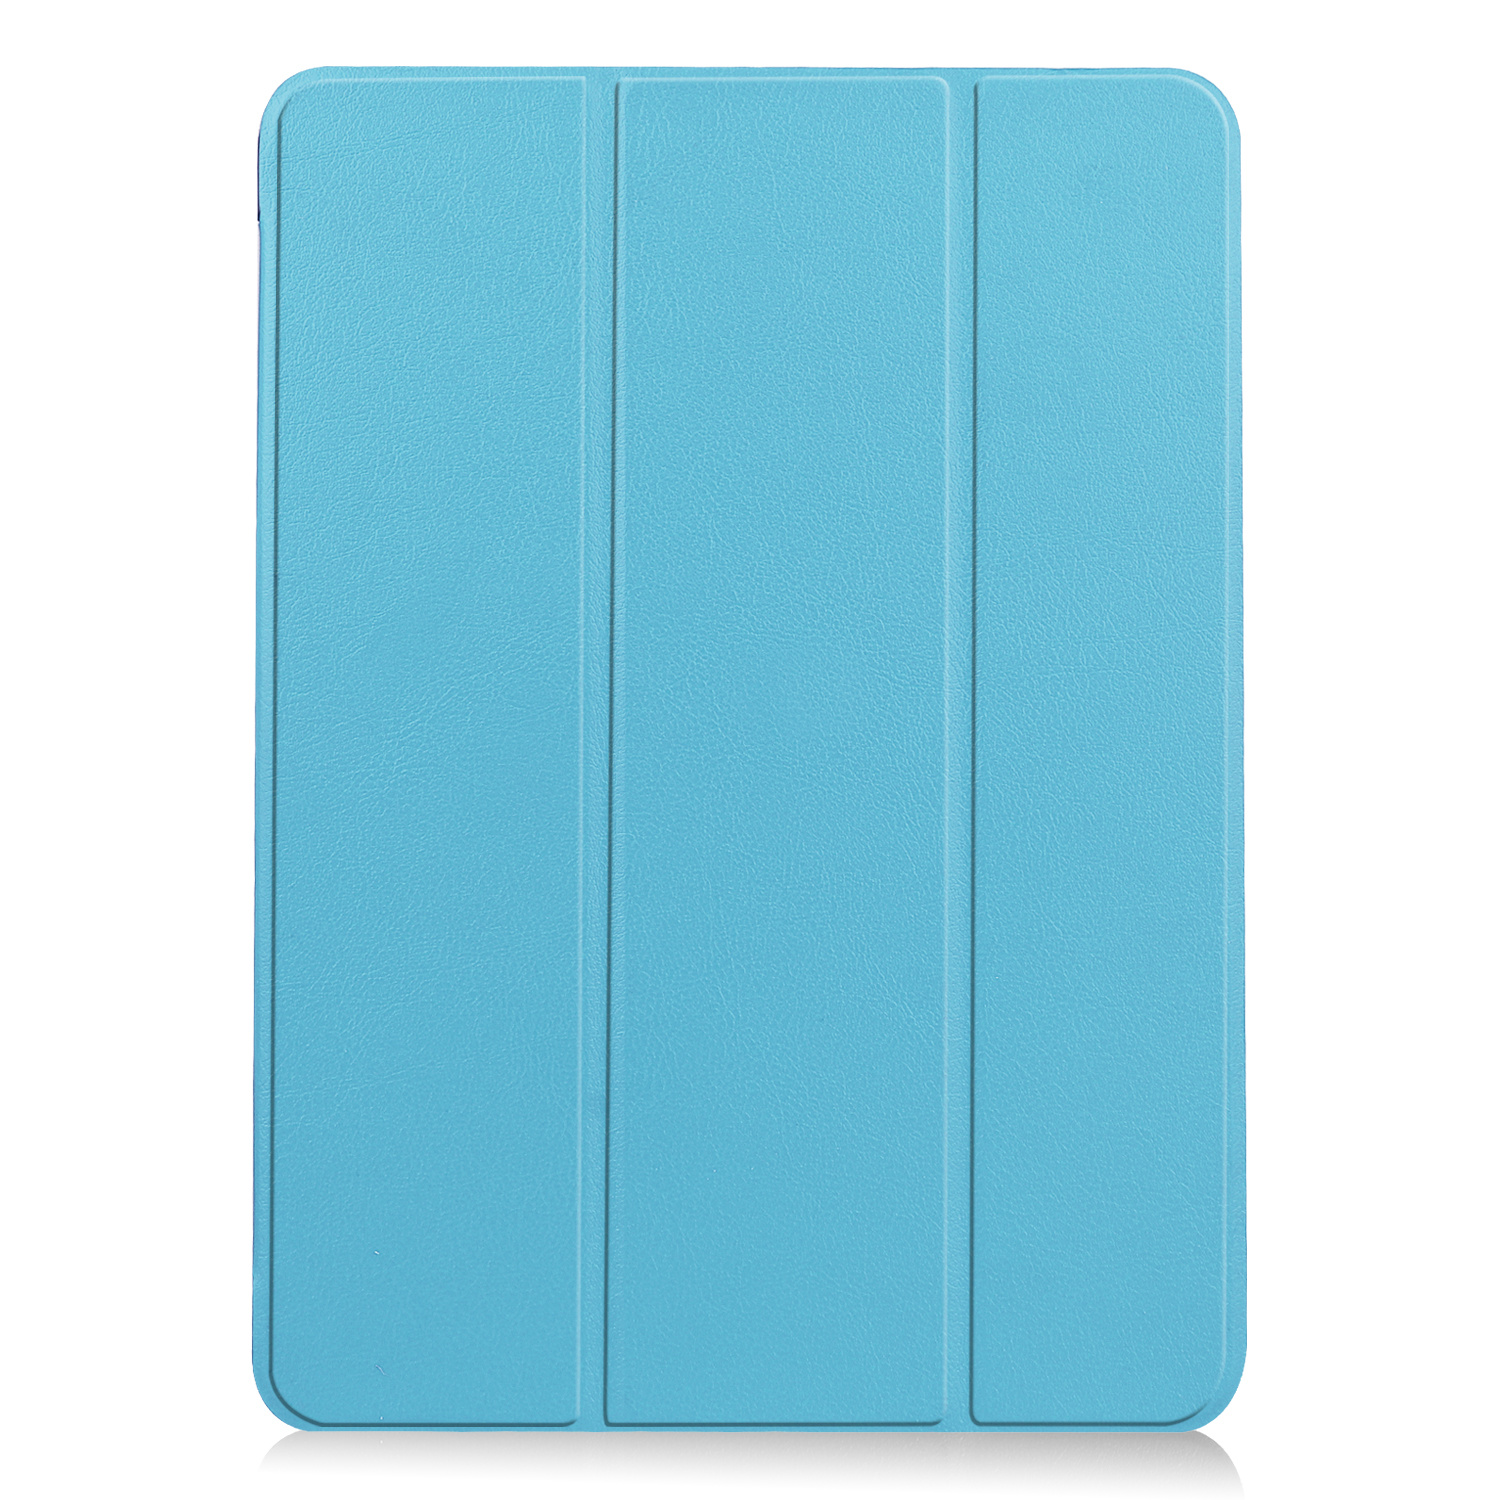 Nomfy iPad Air 5 2022 Hoesje 10.9 inch Case Met Apple Pencil Uitsparing Licht Blauw - iPad Air 2022 Hoes Hardcover Hoesje Licht Blauw Bookcase